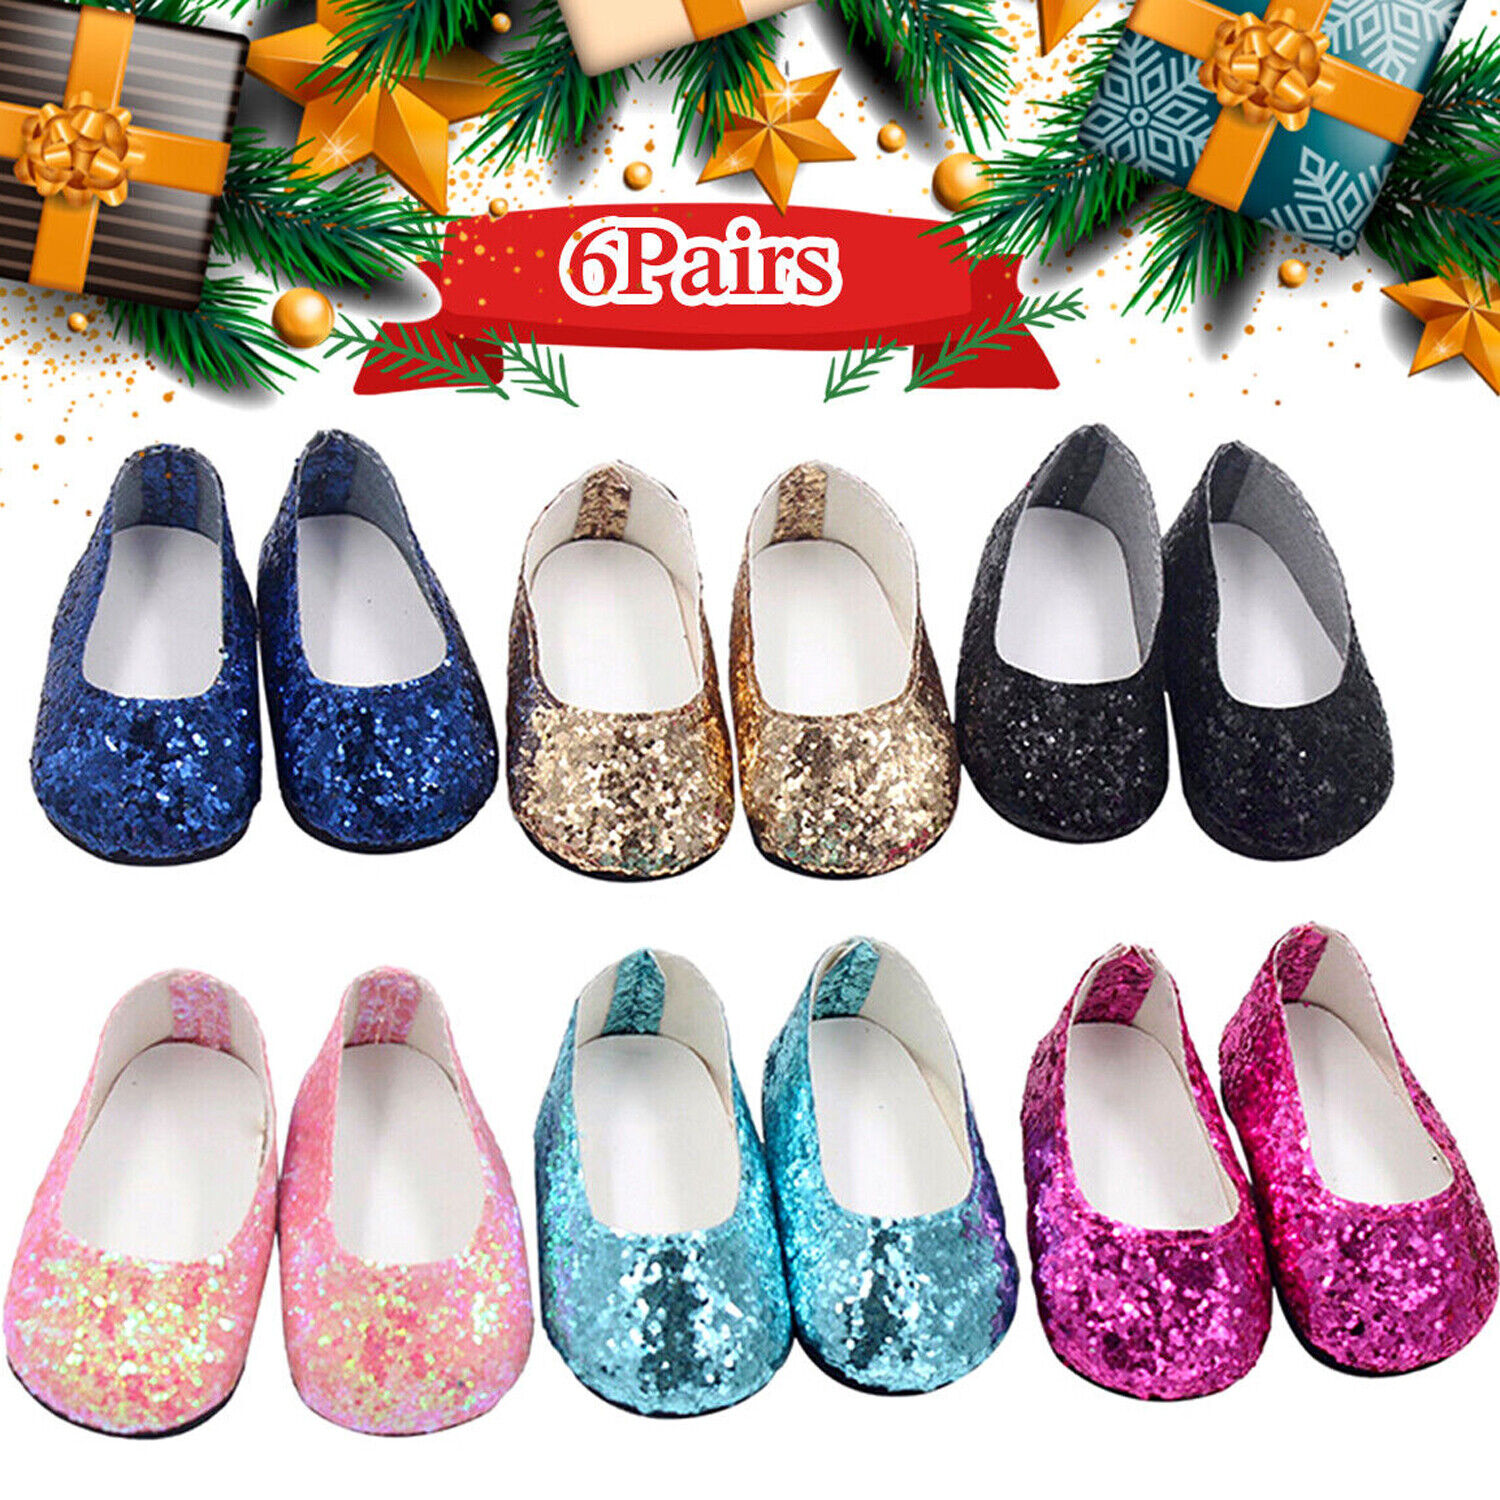 6 Pairs Doll Shoes Set Fit 18'' Doll Adorable Glitter Princess Shoe Xmas Gift Unbranded Does not apply